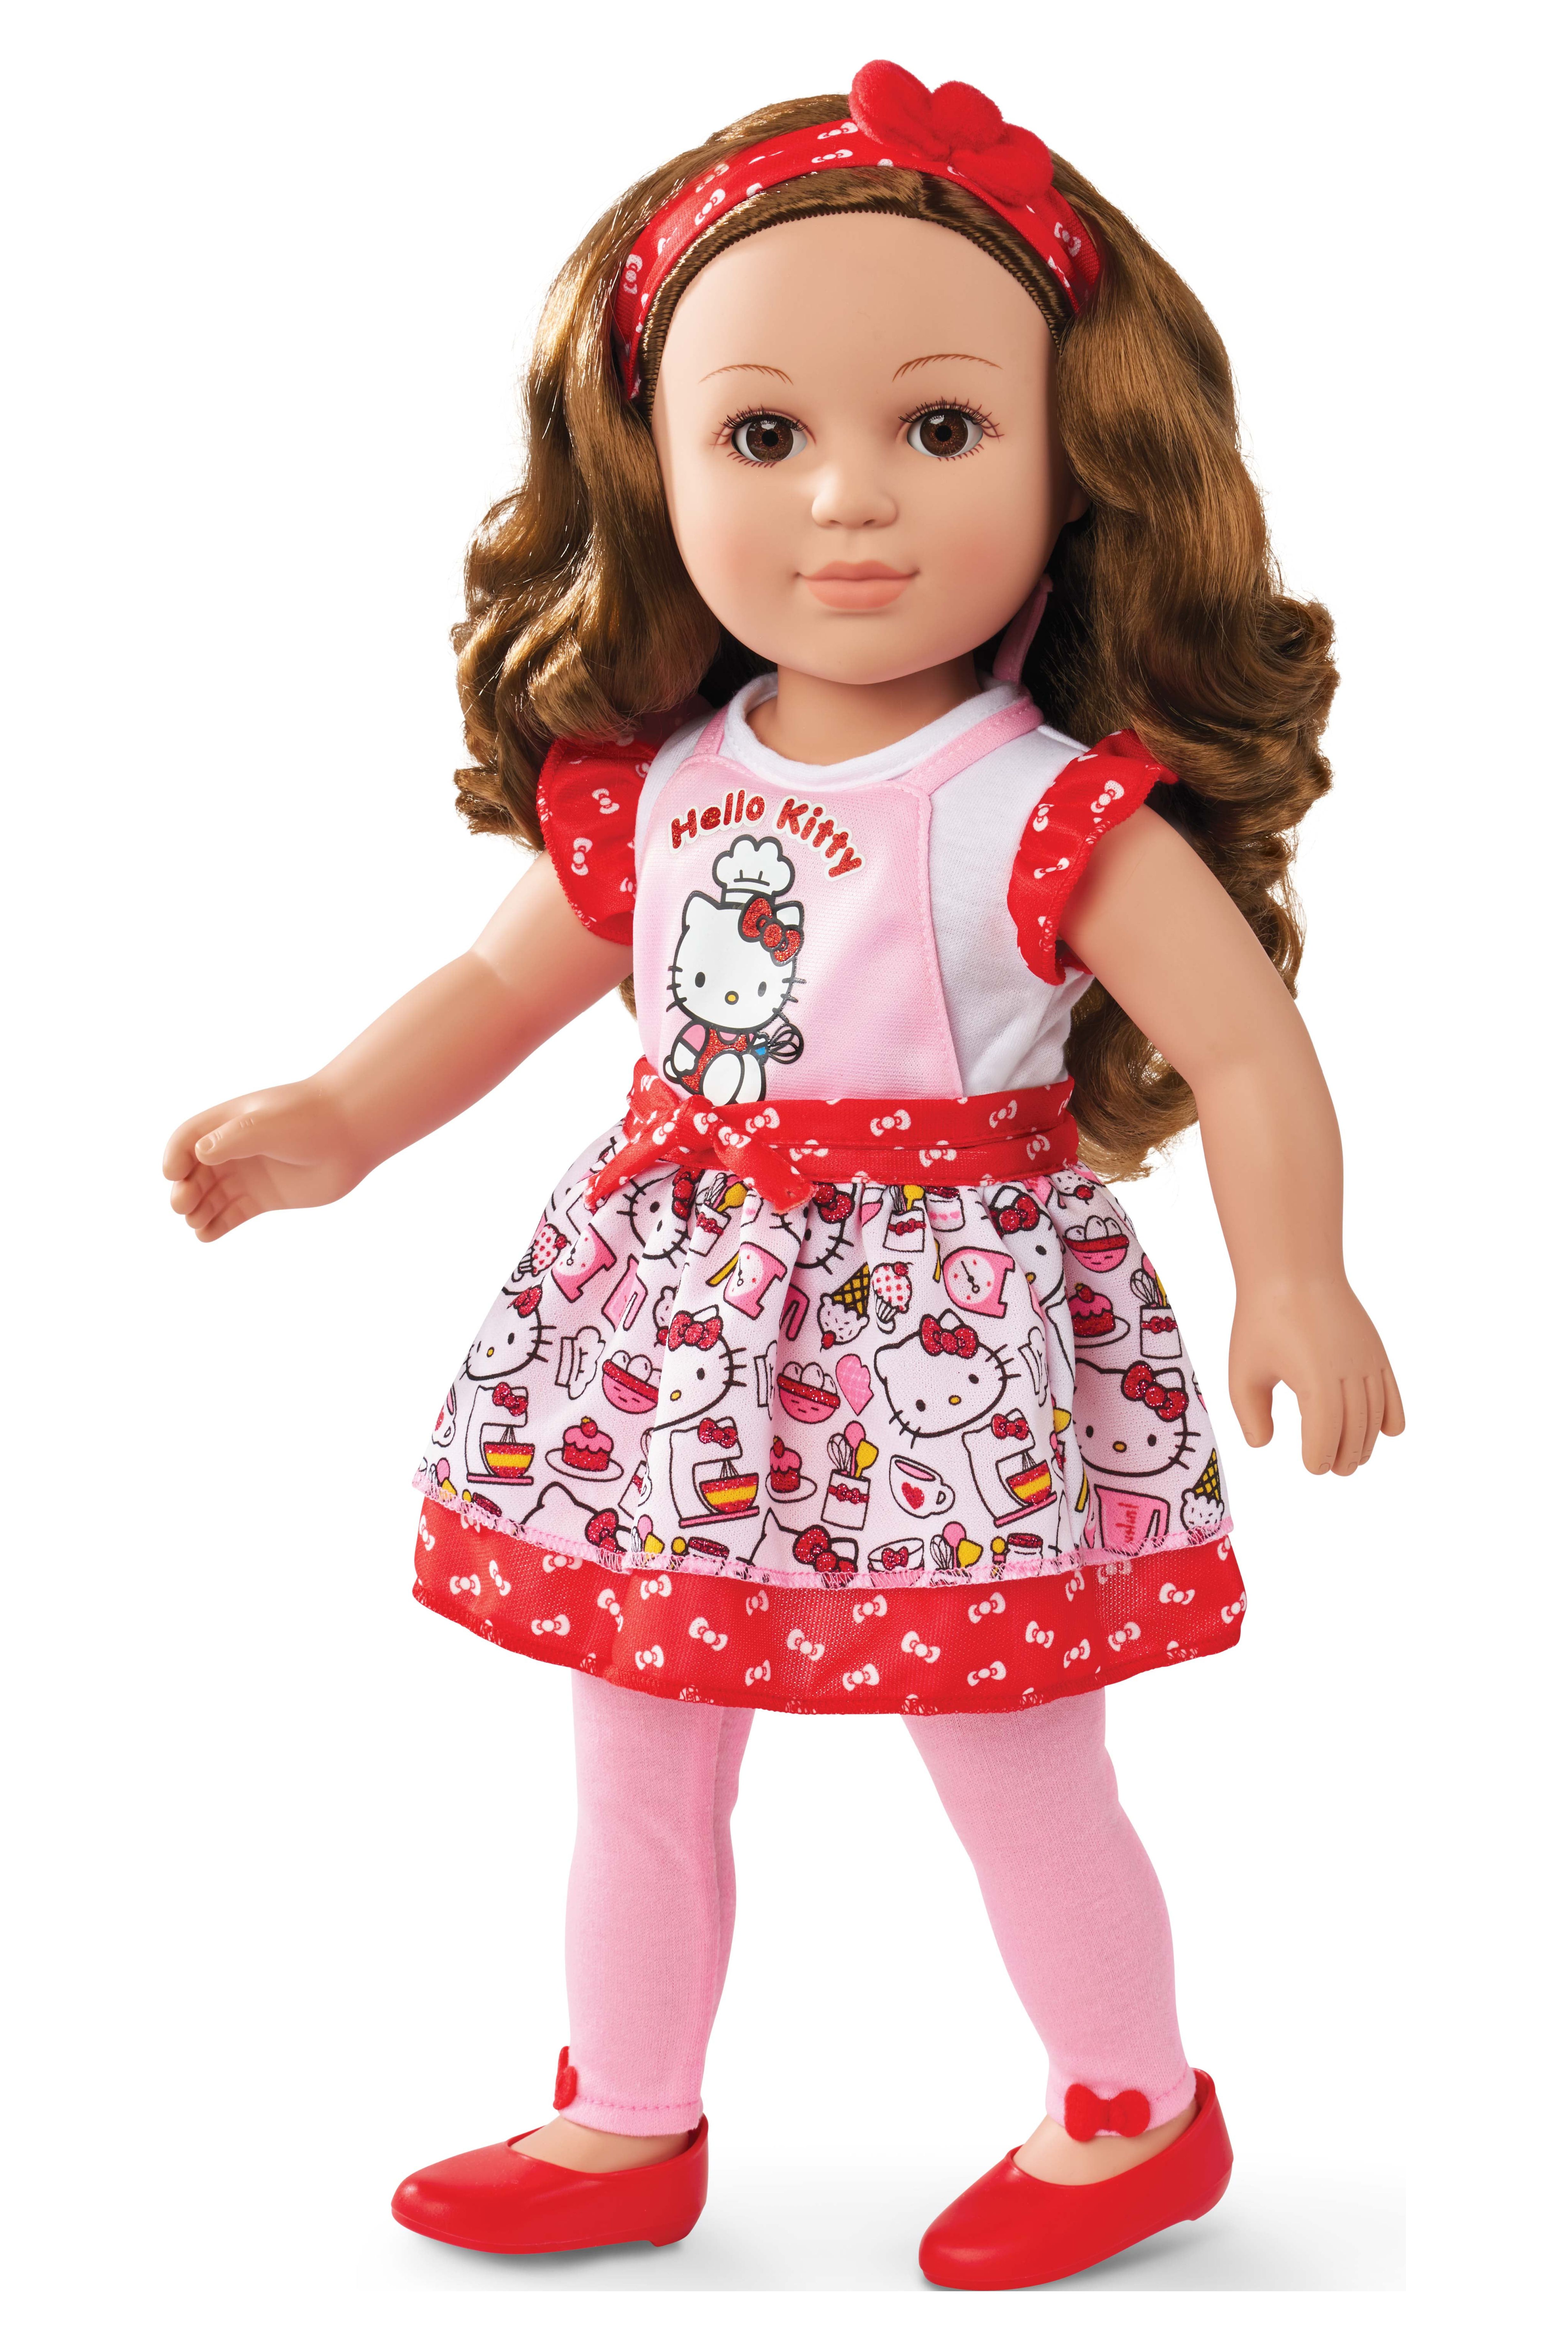 My Life As Poseable Hello Kitty Baker 18inch Doll, Brunette Hair, Brown Eyes - image 3 of 8